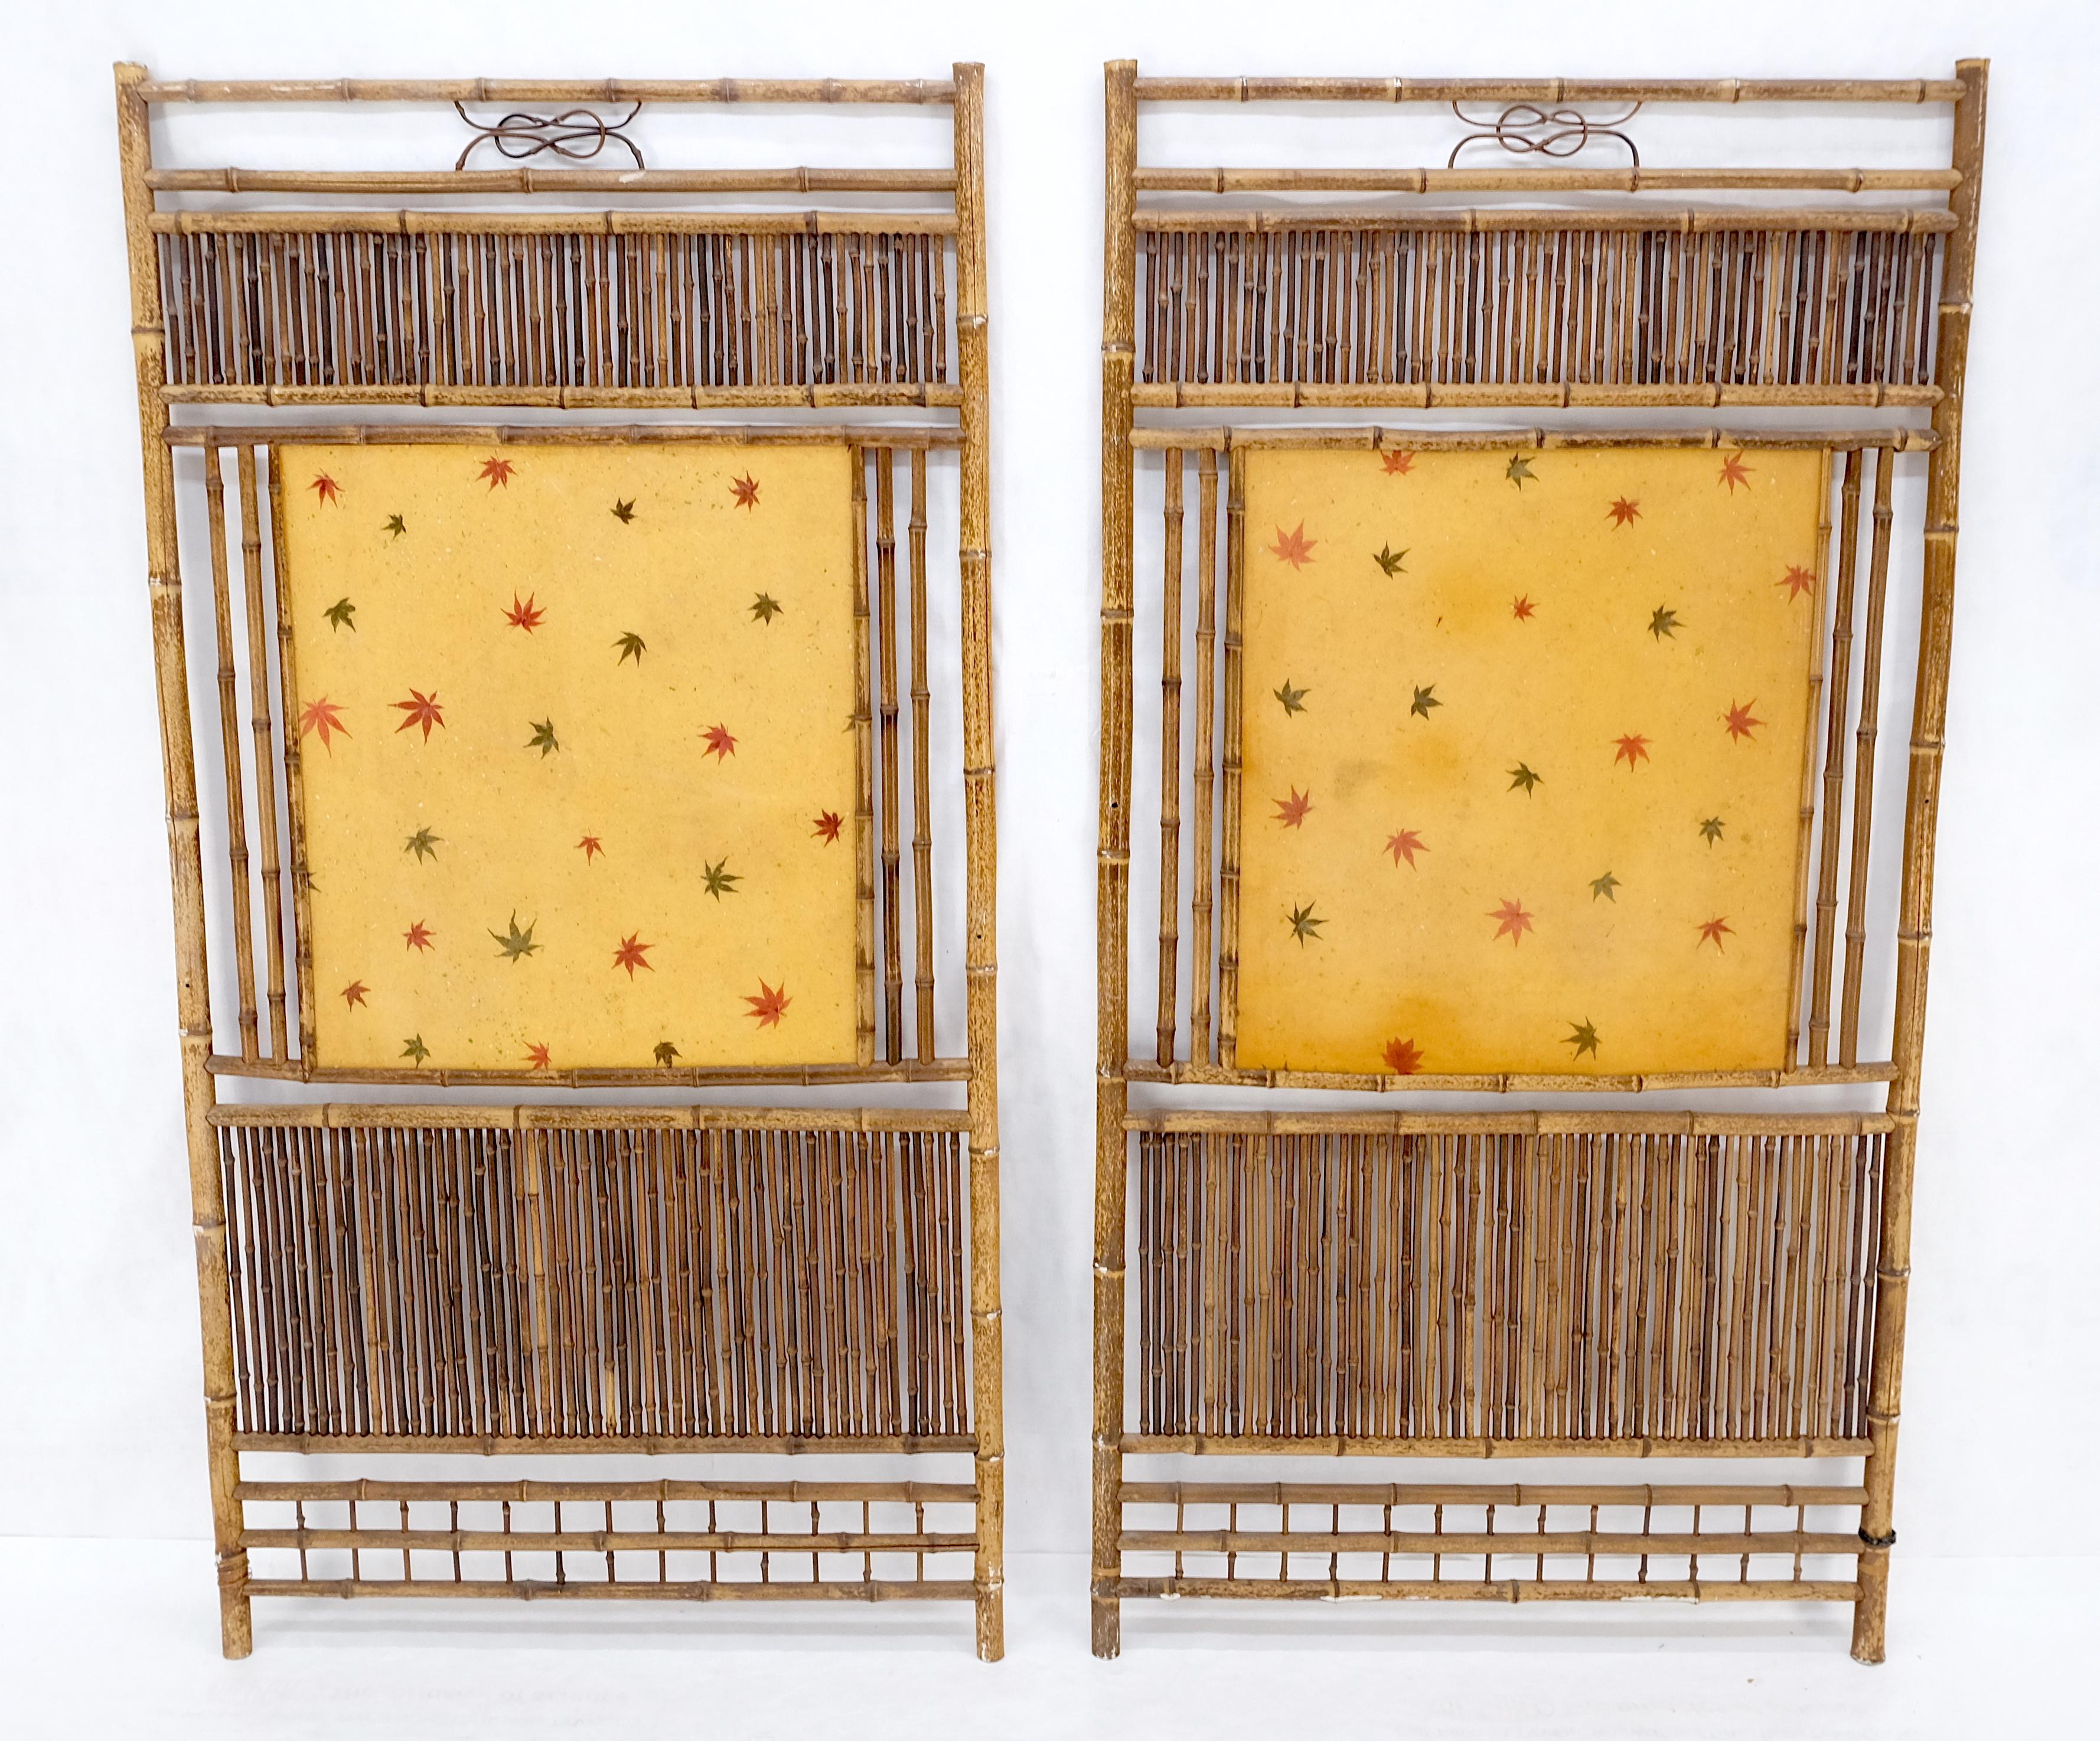 20th Century Pair of Japanese Modern Bamboo Room Dividers Screens Decorative Panels Wall Art For Sale